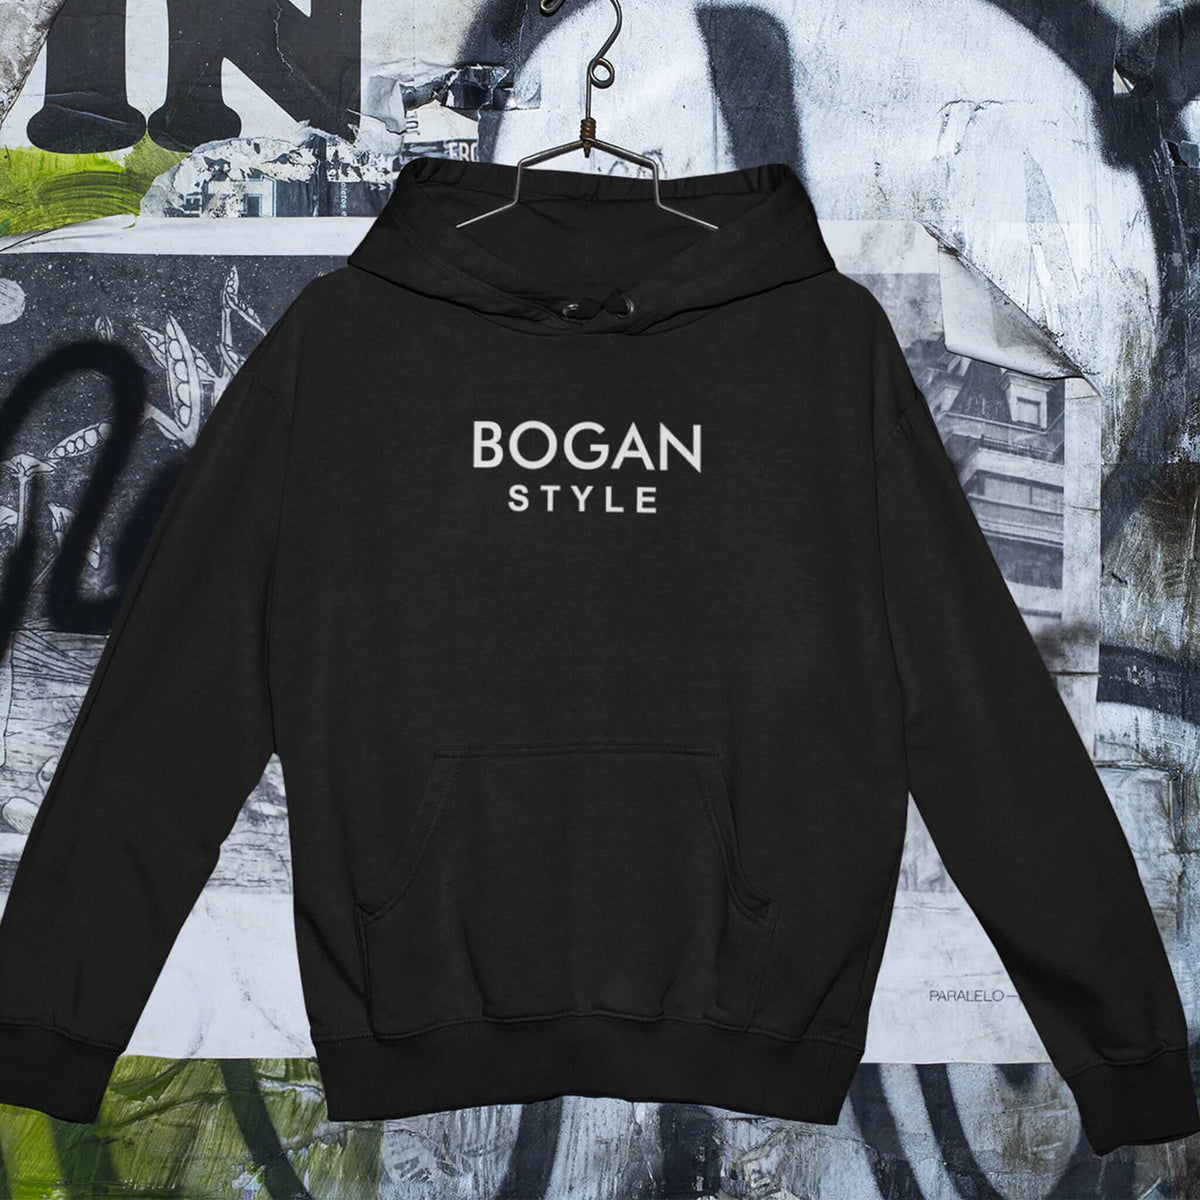 Men's black hoodie with Bogan Style printed on the front